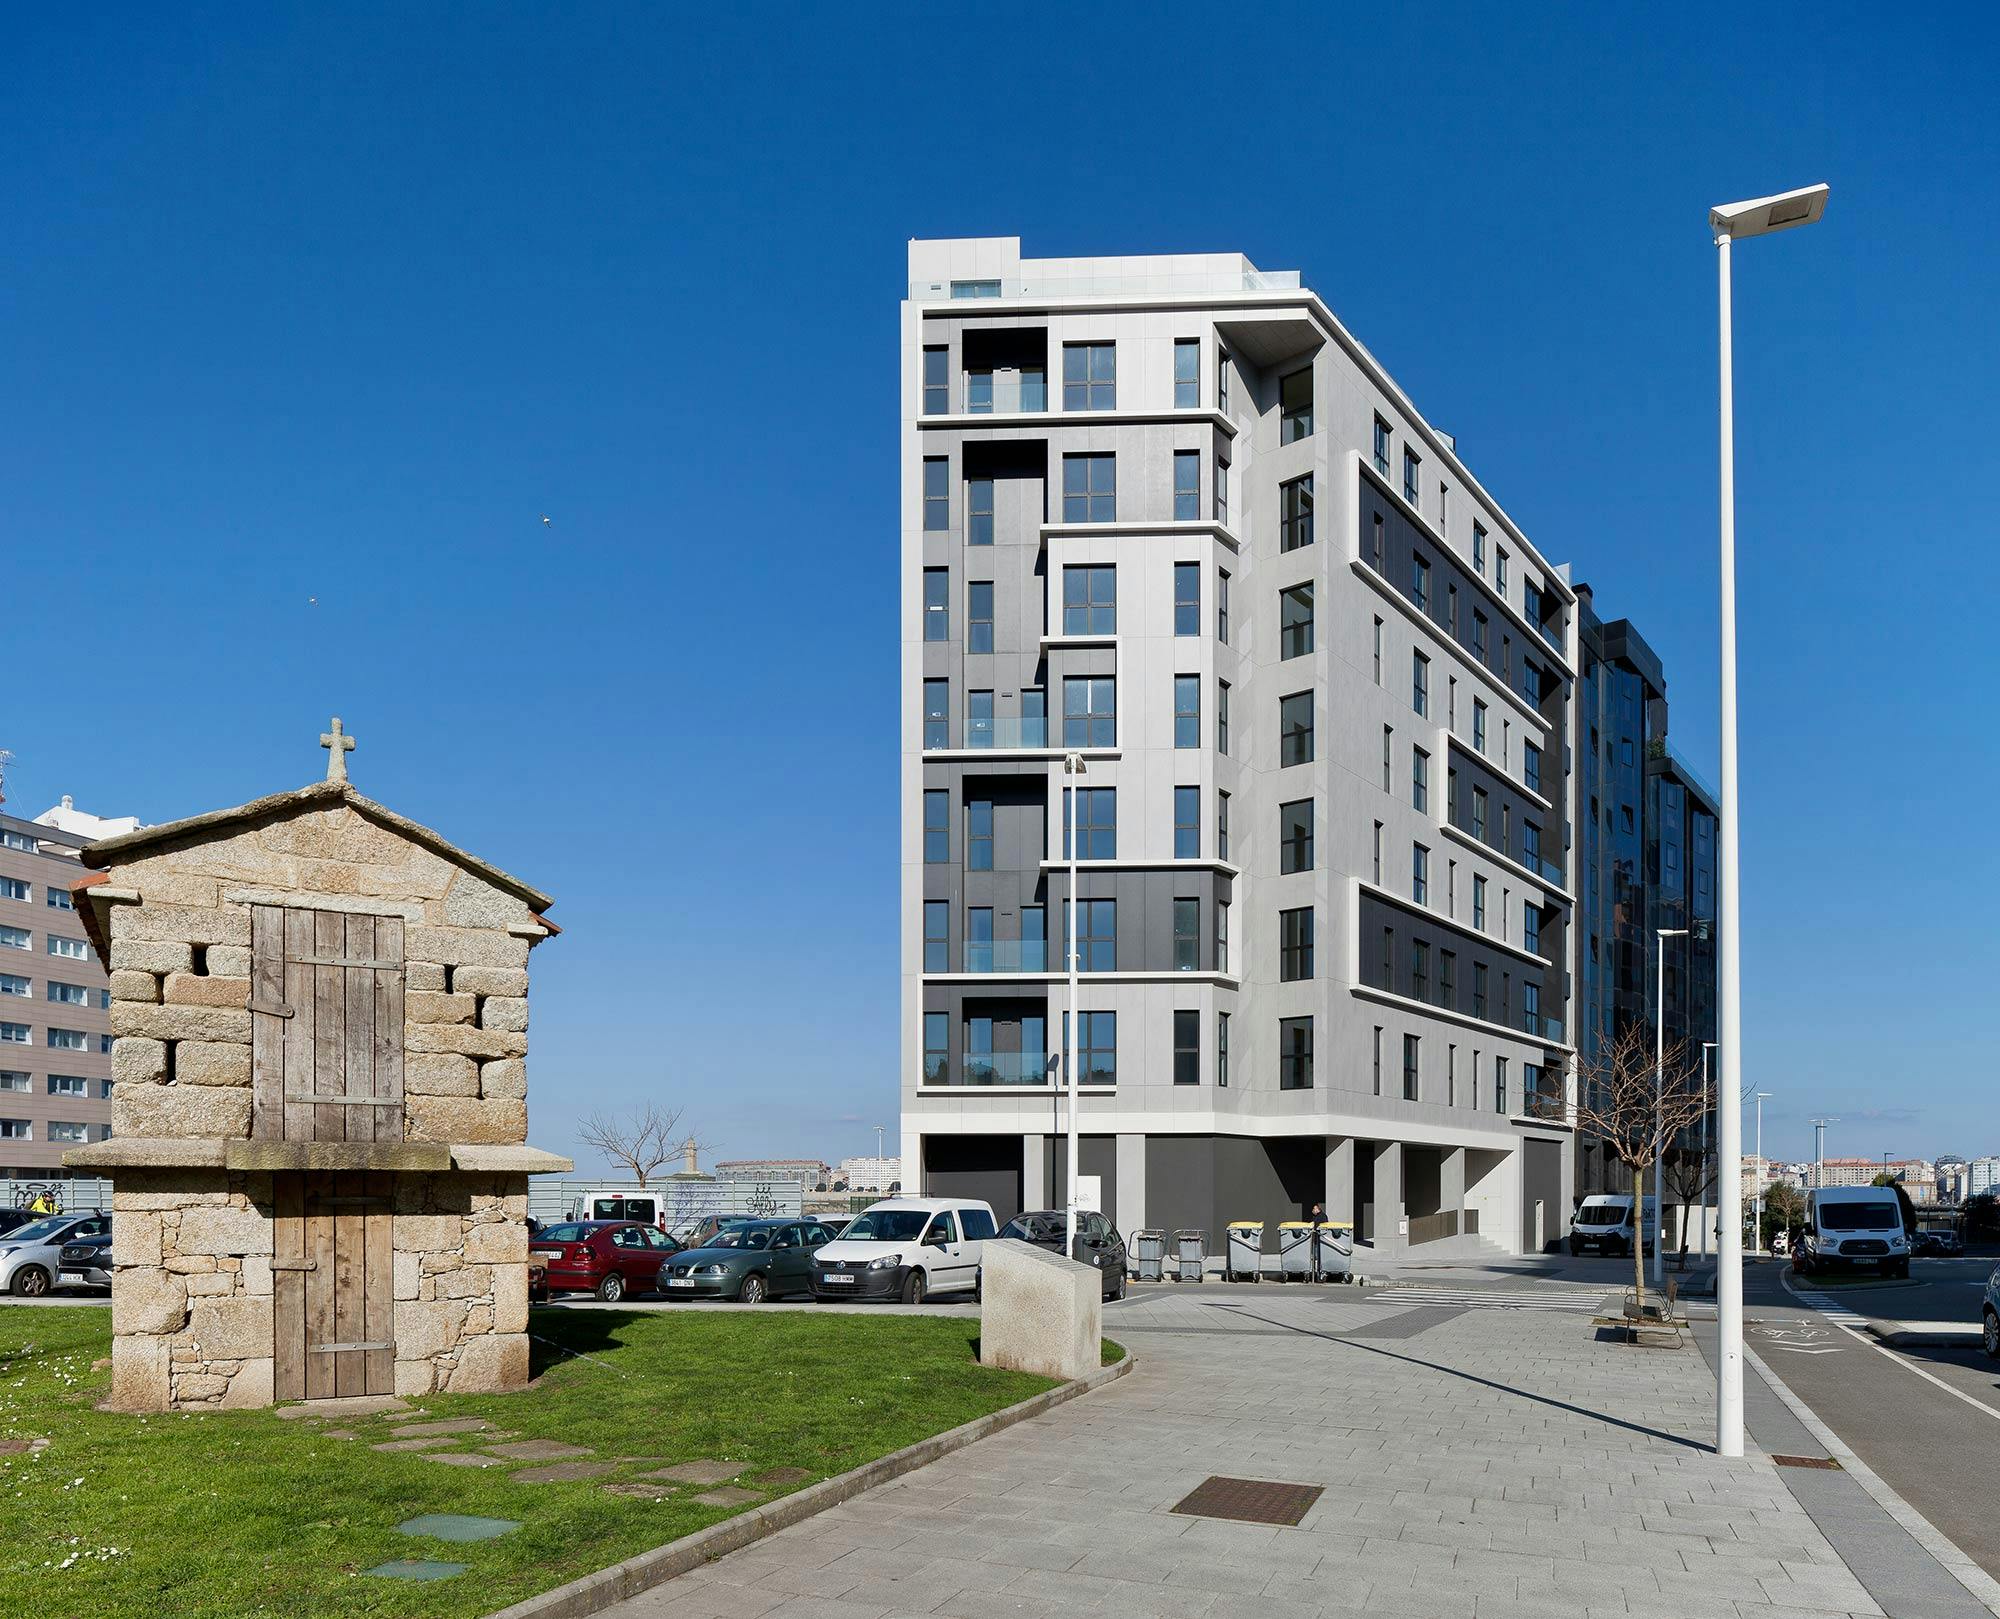 A modern and sustainable façade in A Coruña thanks to Dekton